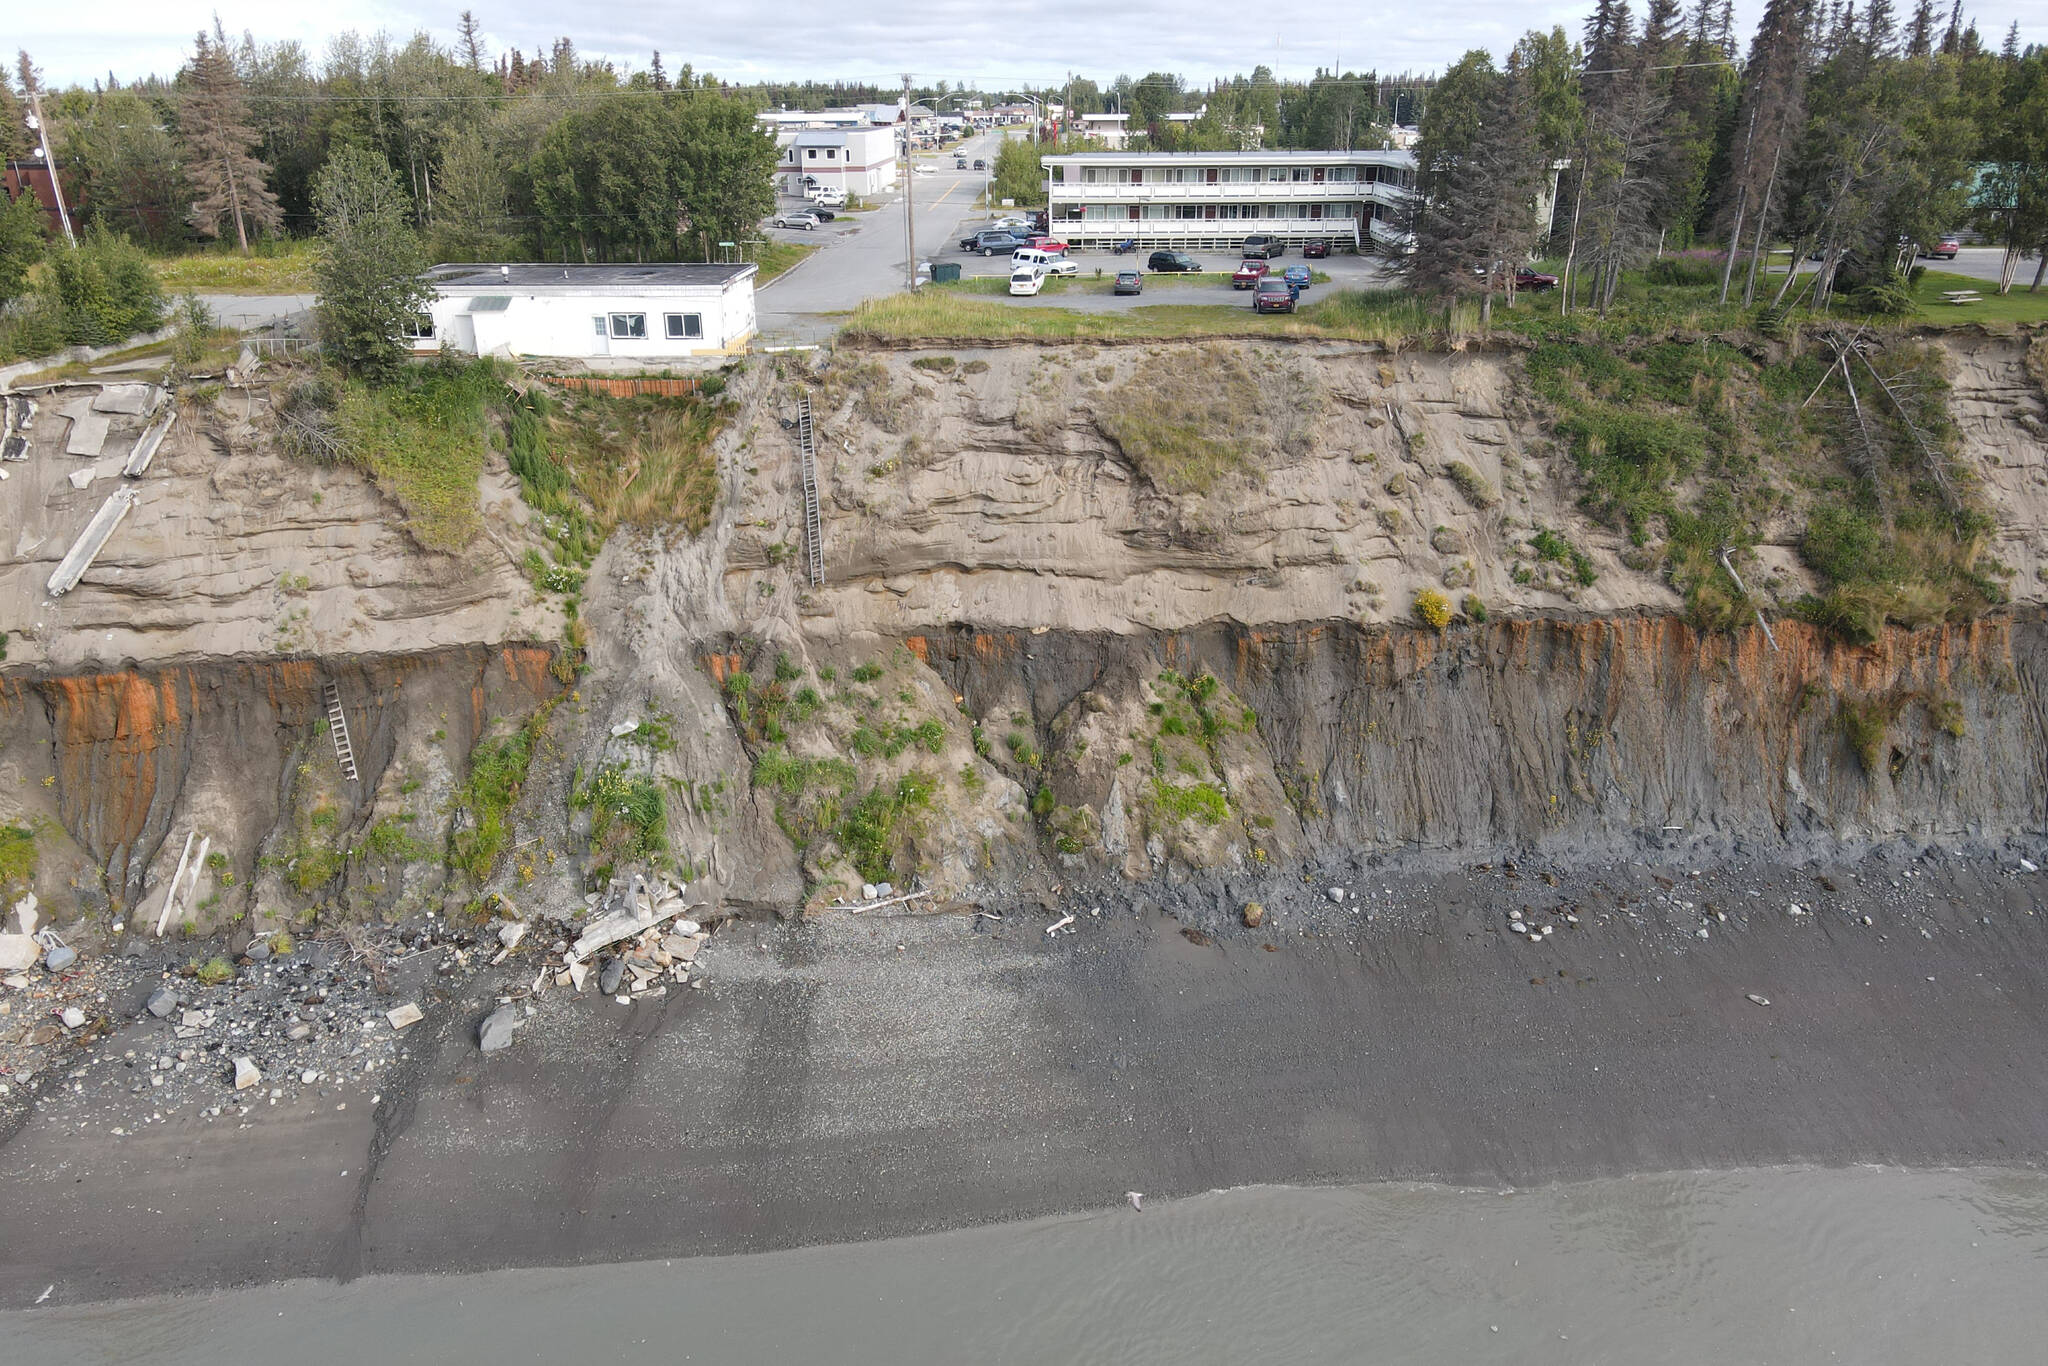 Portions of the Kenai bluff can be seen eroding below Old Town Kenai in this undated photo. (Photo by Aidan Curtin/courtesy Scott Curtin)
Portions of the Kenai bluff can be seen eroding below Old Town Kenai in this undated photo. (Photo by Aidan Curtin/courtesy Scott Curtin)